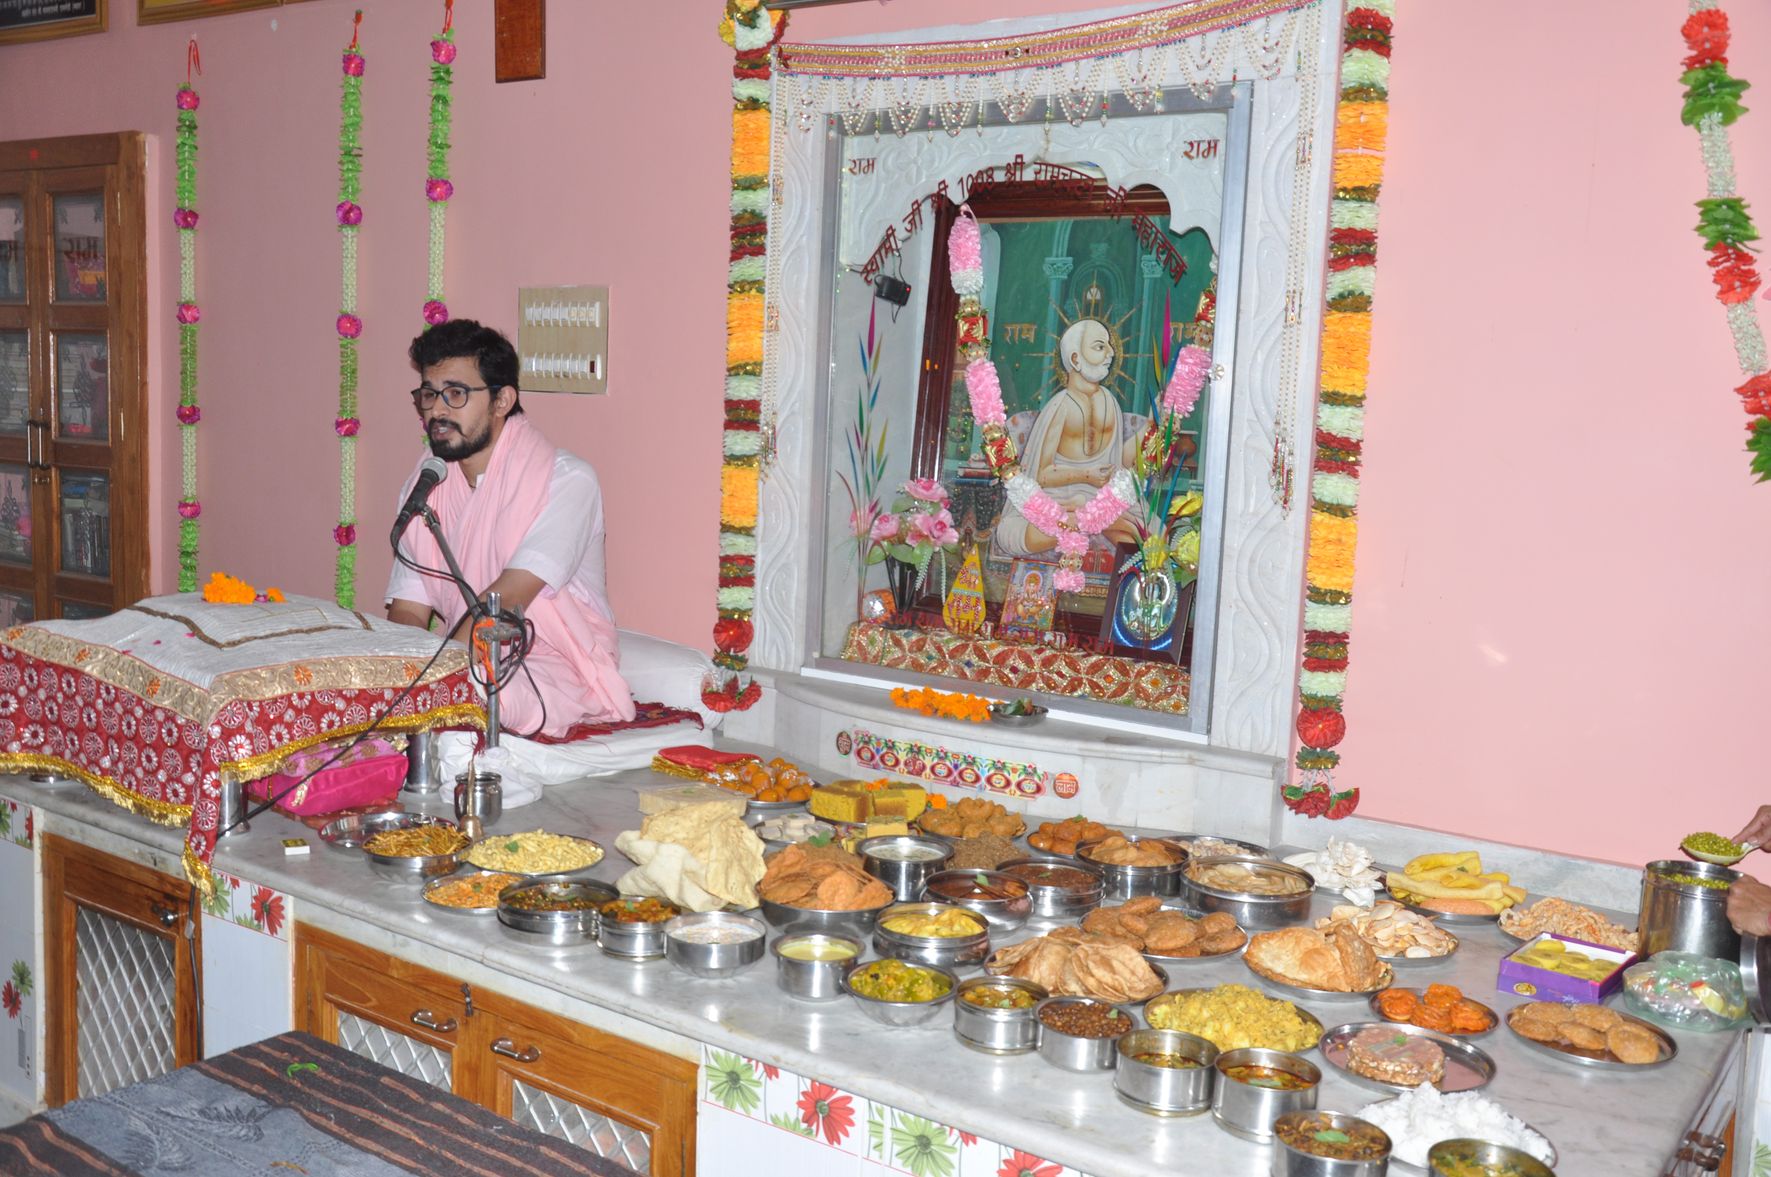 Dhanukoot Festival shines in temples